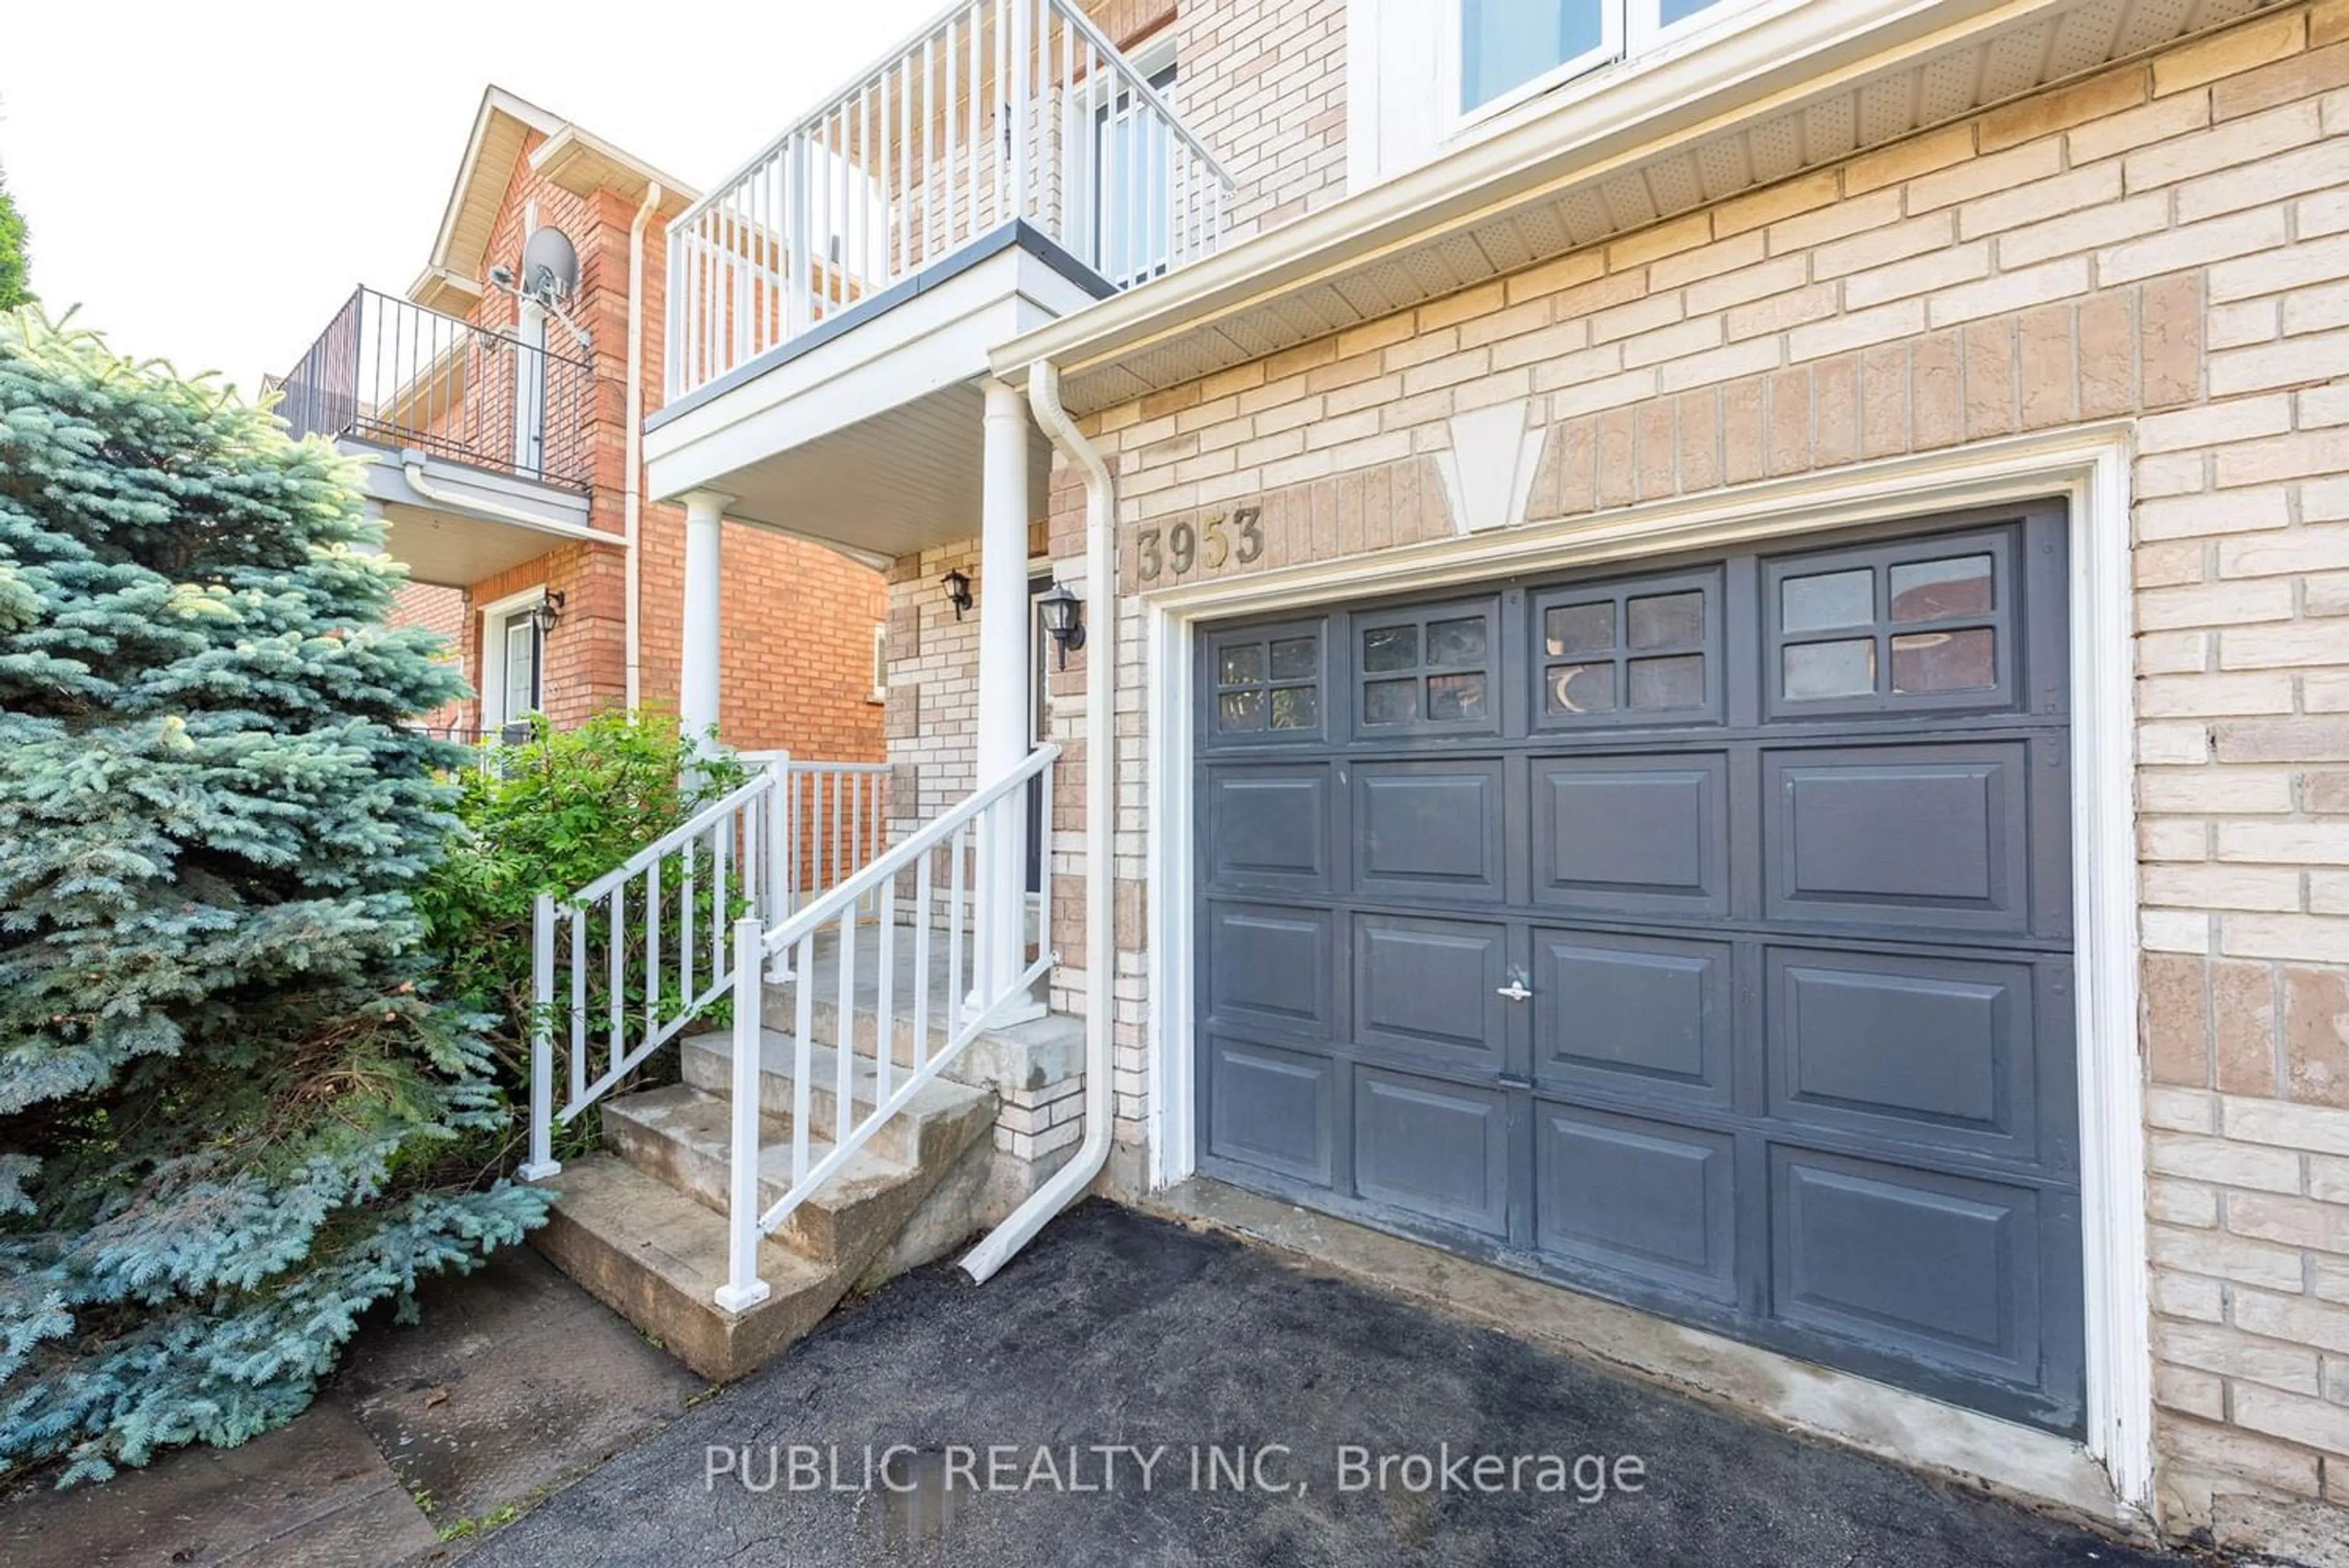 A pic from exterior of the house or condo for 3953 Freeman Terr, Mississauga Ontario L5M 6R2